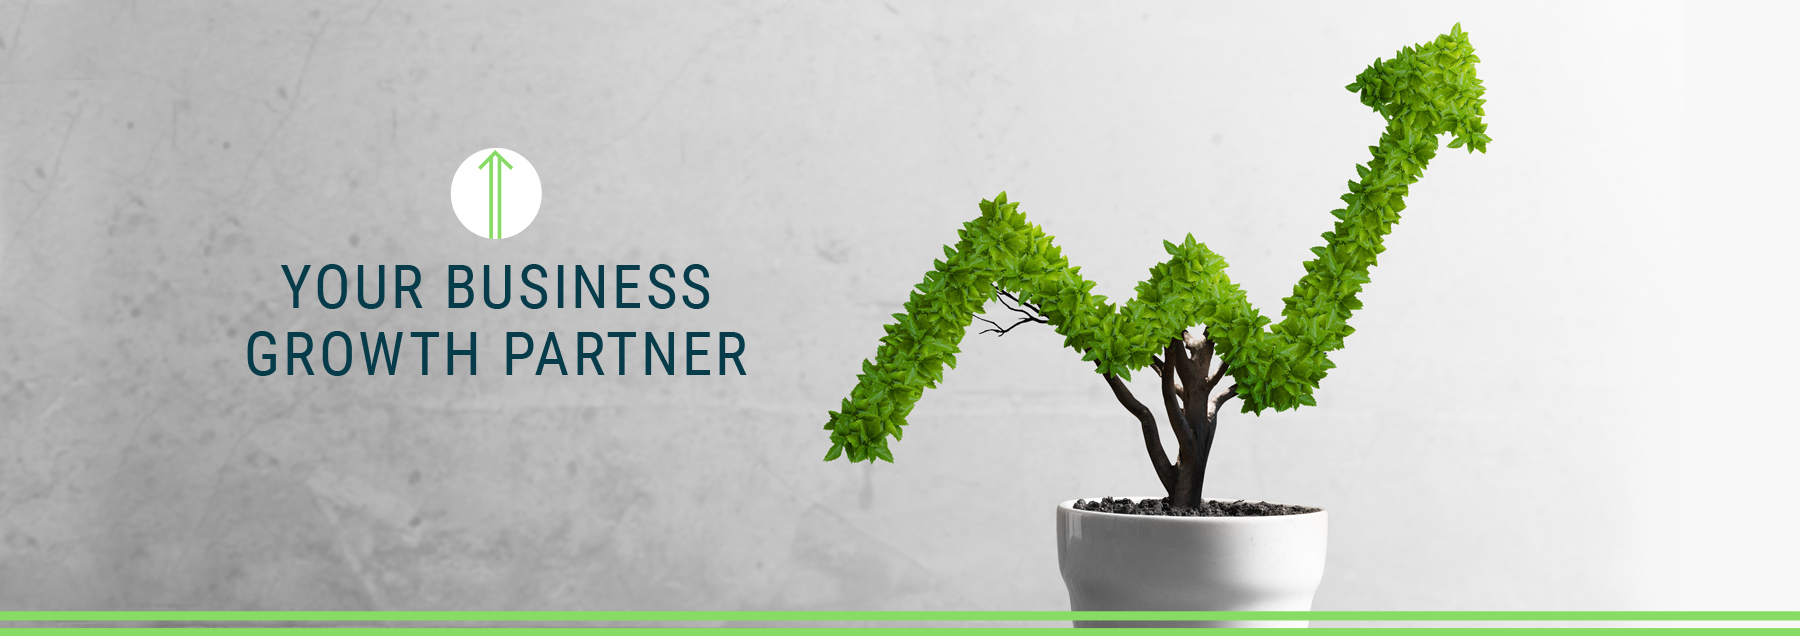 What Makes Us Your Business Growth Partner